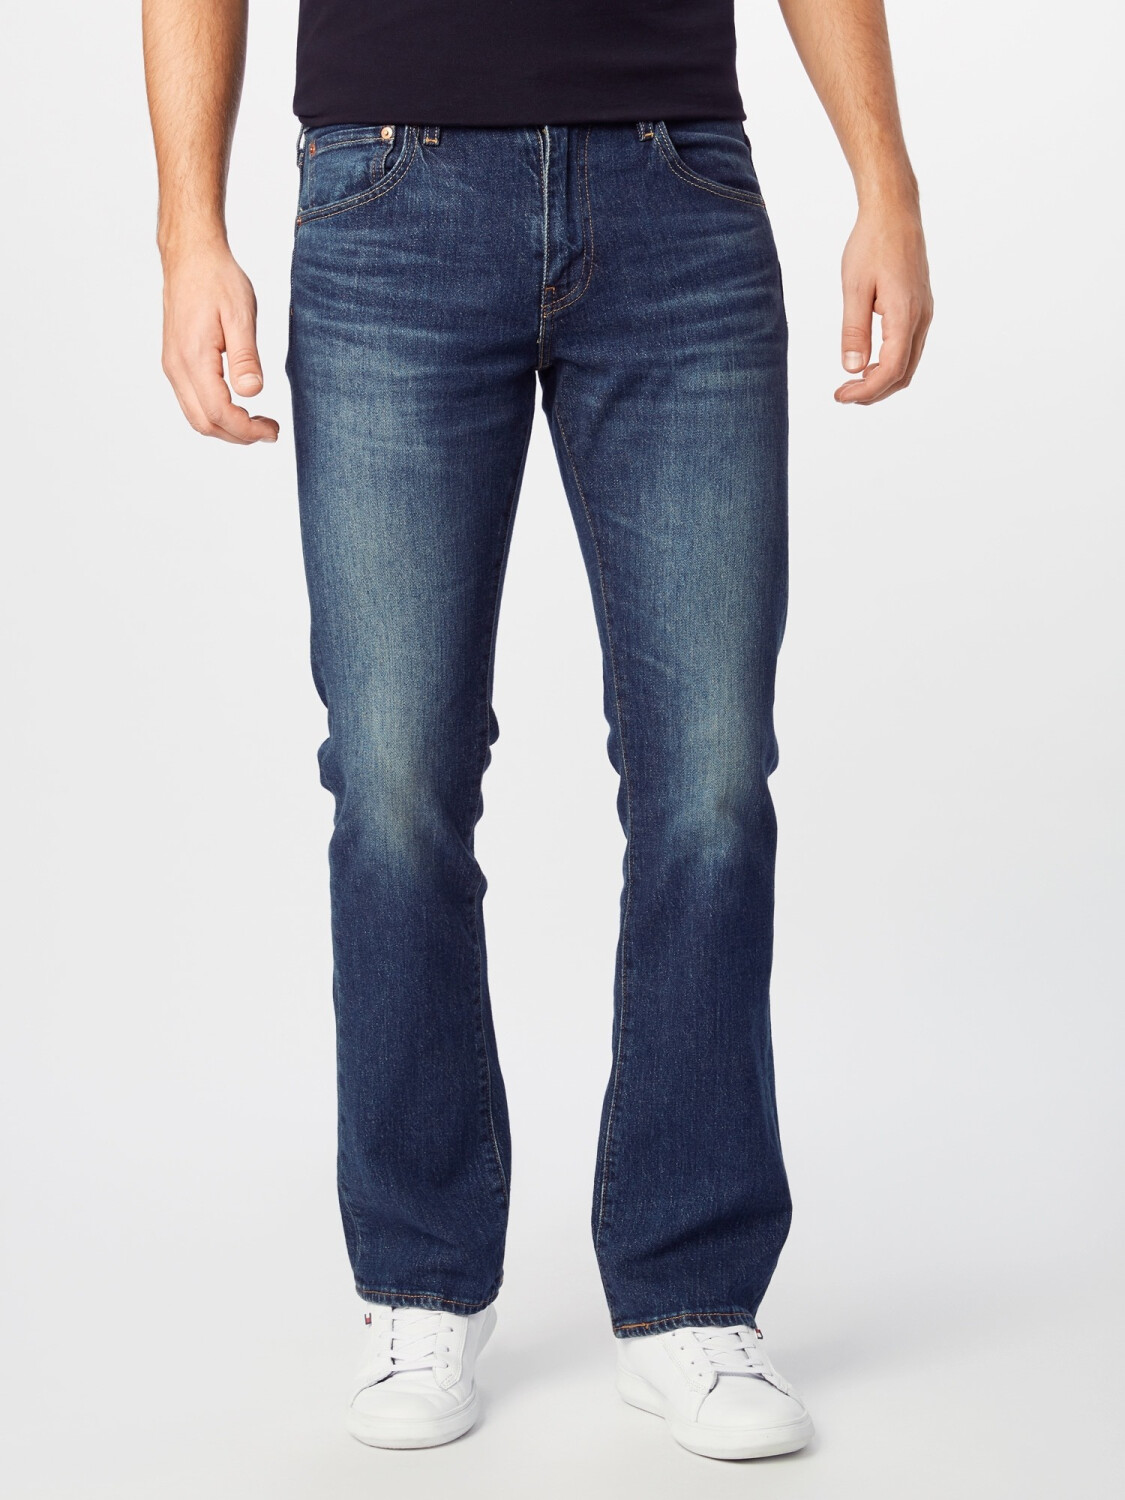 Buy Levi's 527 Slim Boot Cut durian super tint from £48.00 (Today ...